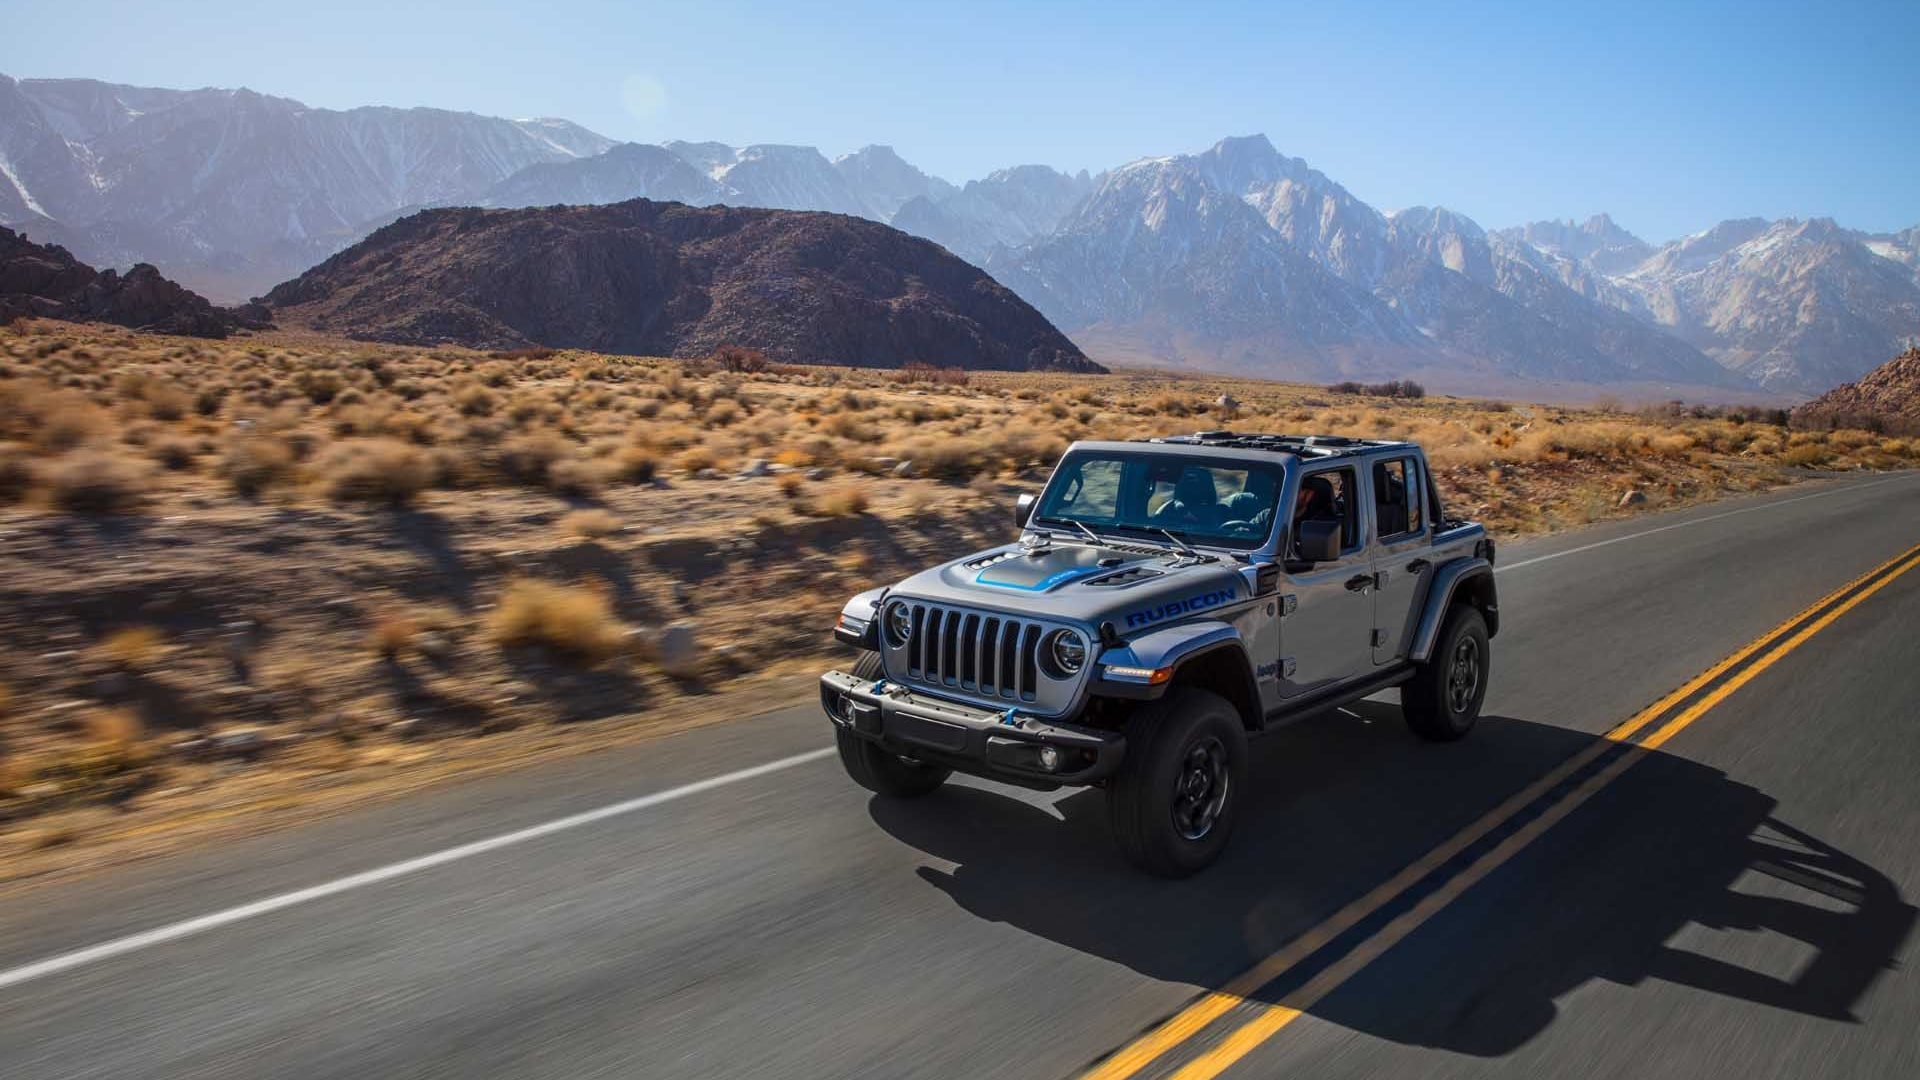 Plug-in hybrid SUV lease deal: Jeep Wrangler 4xe costs much less than  Toyota RAV4 Prime